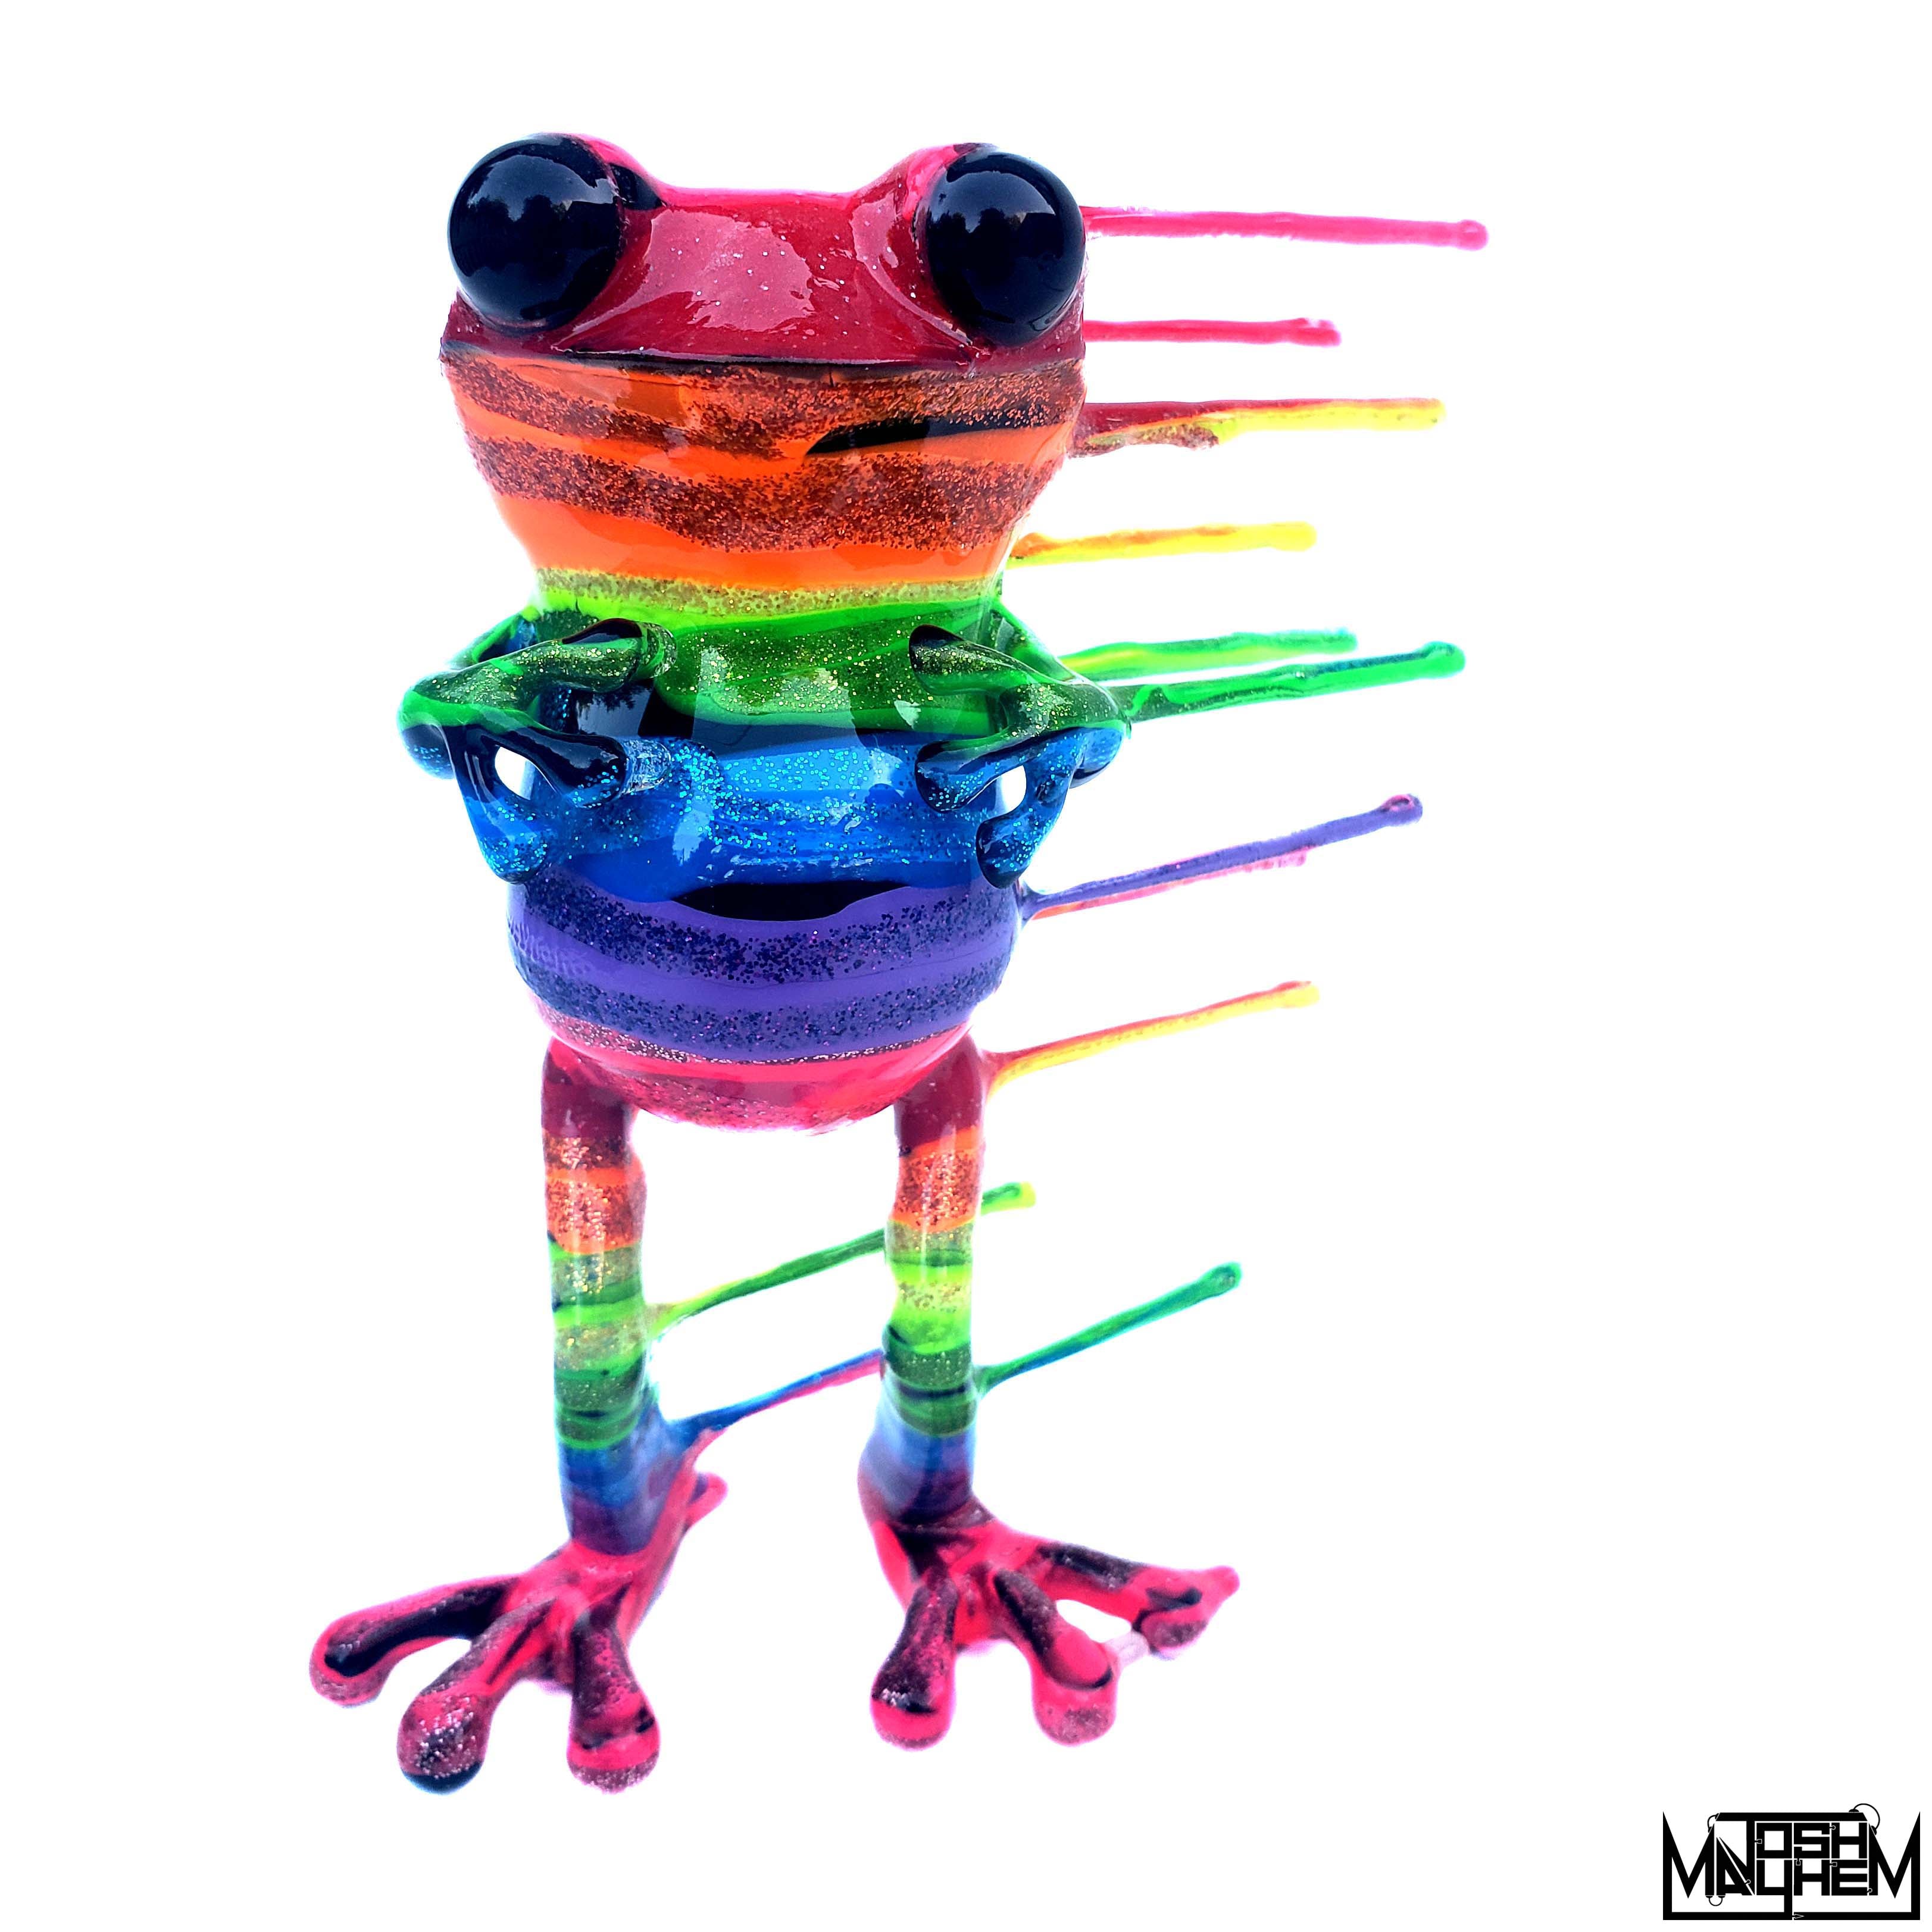 Blown Away APO frog by Josh Mayhem, a unique resin sculpture with a child art toy drawing.